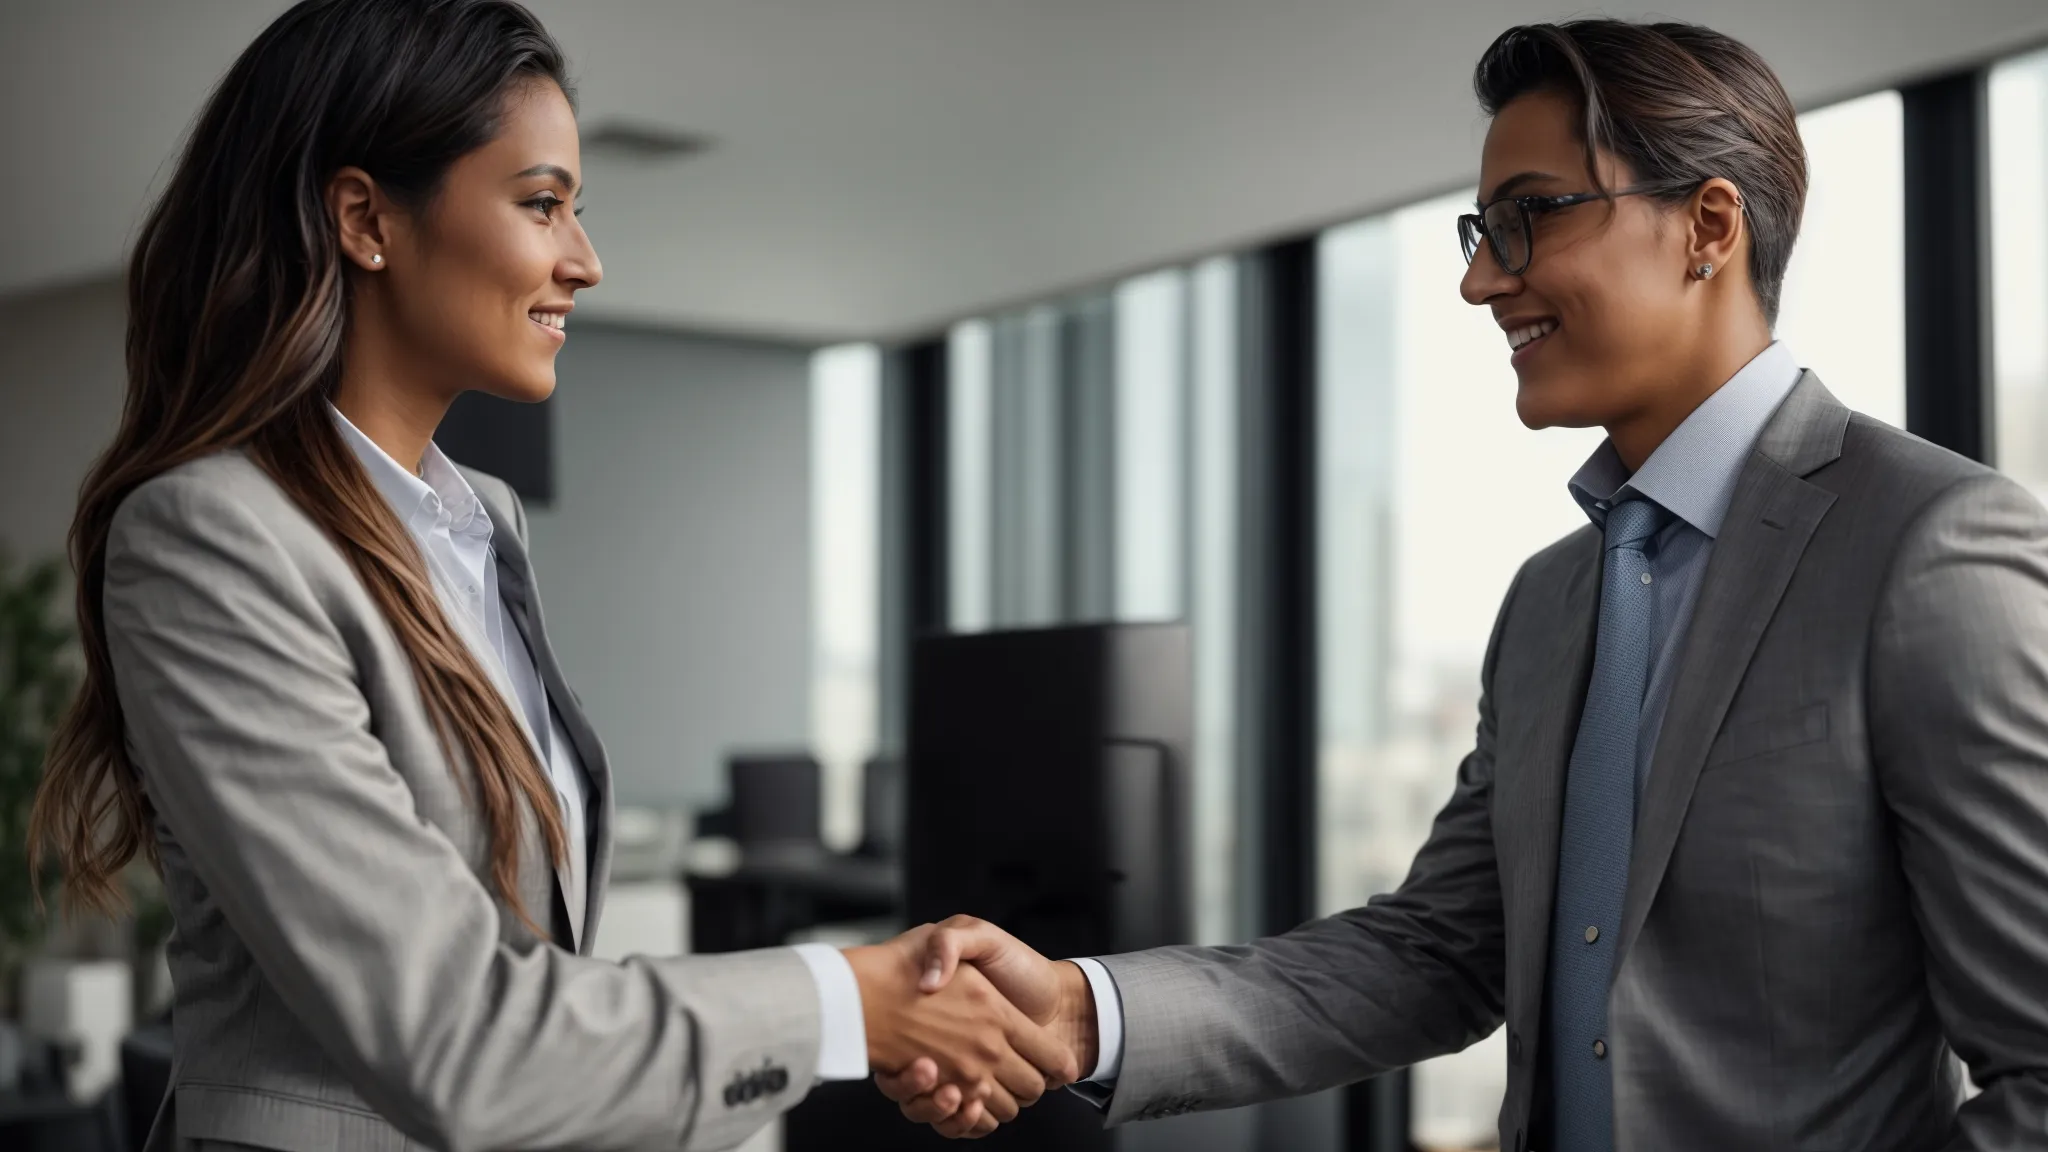 a close-up of a confident business professional shaking hands with a local seo expert in a modern office setting.